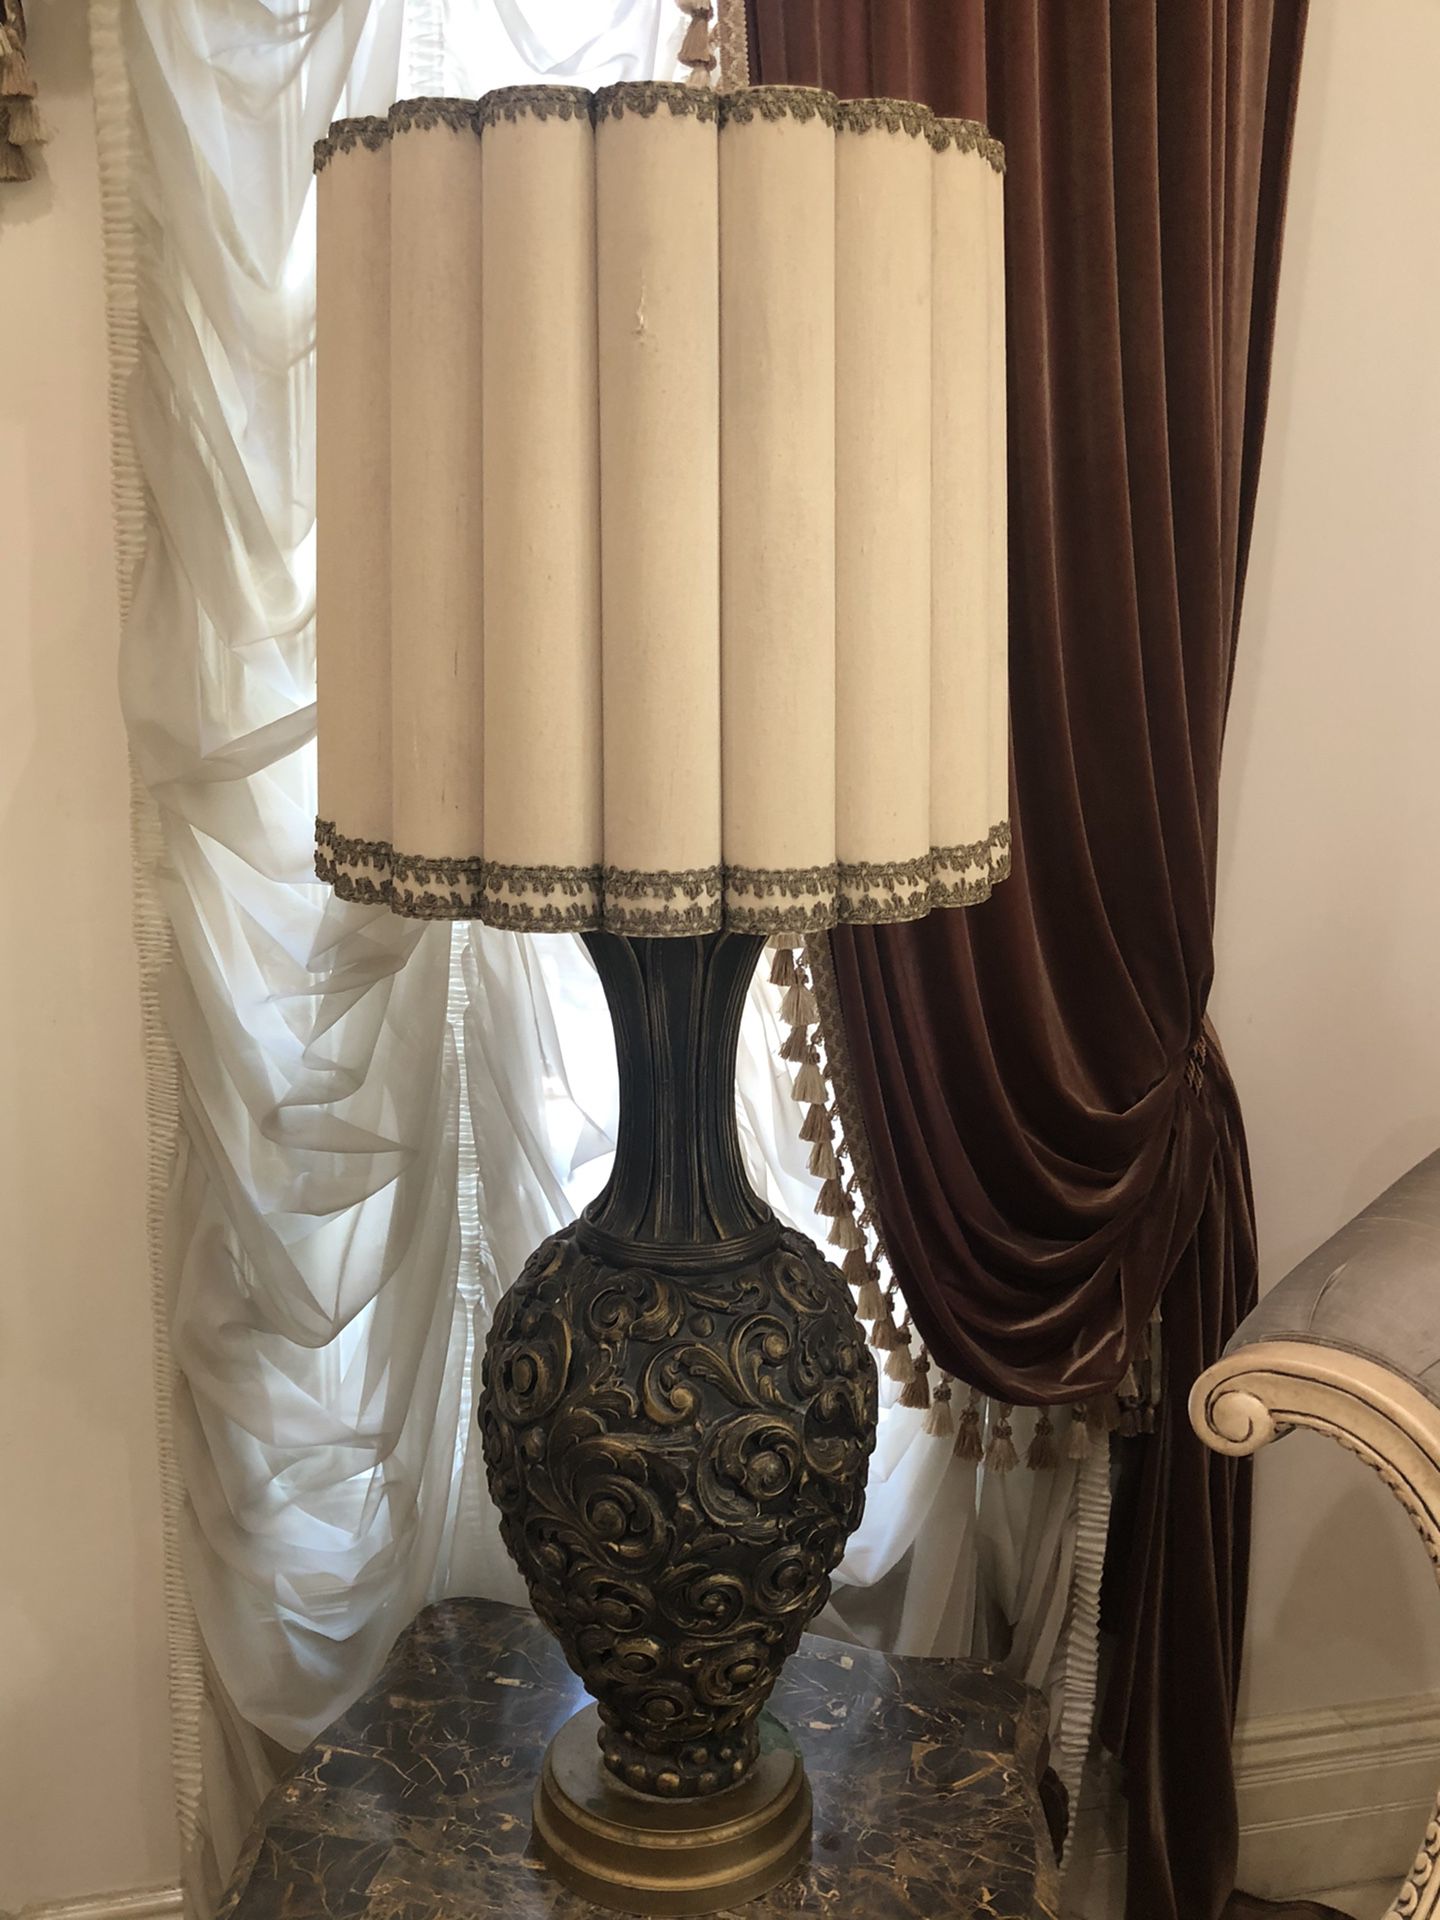 Finely detailed antique Lamp stand